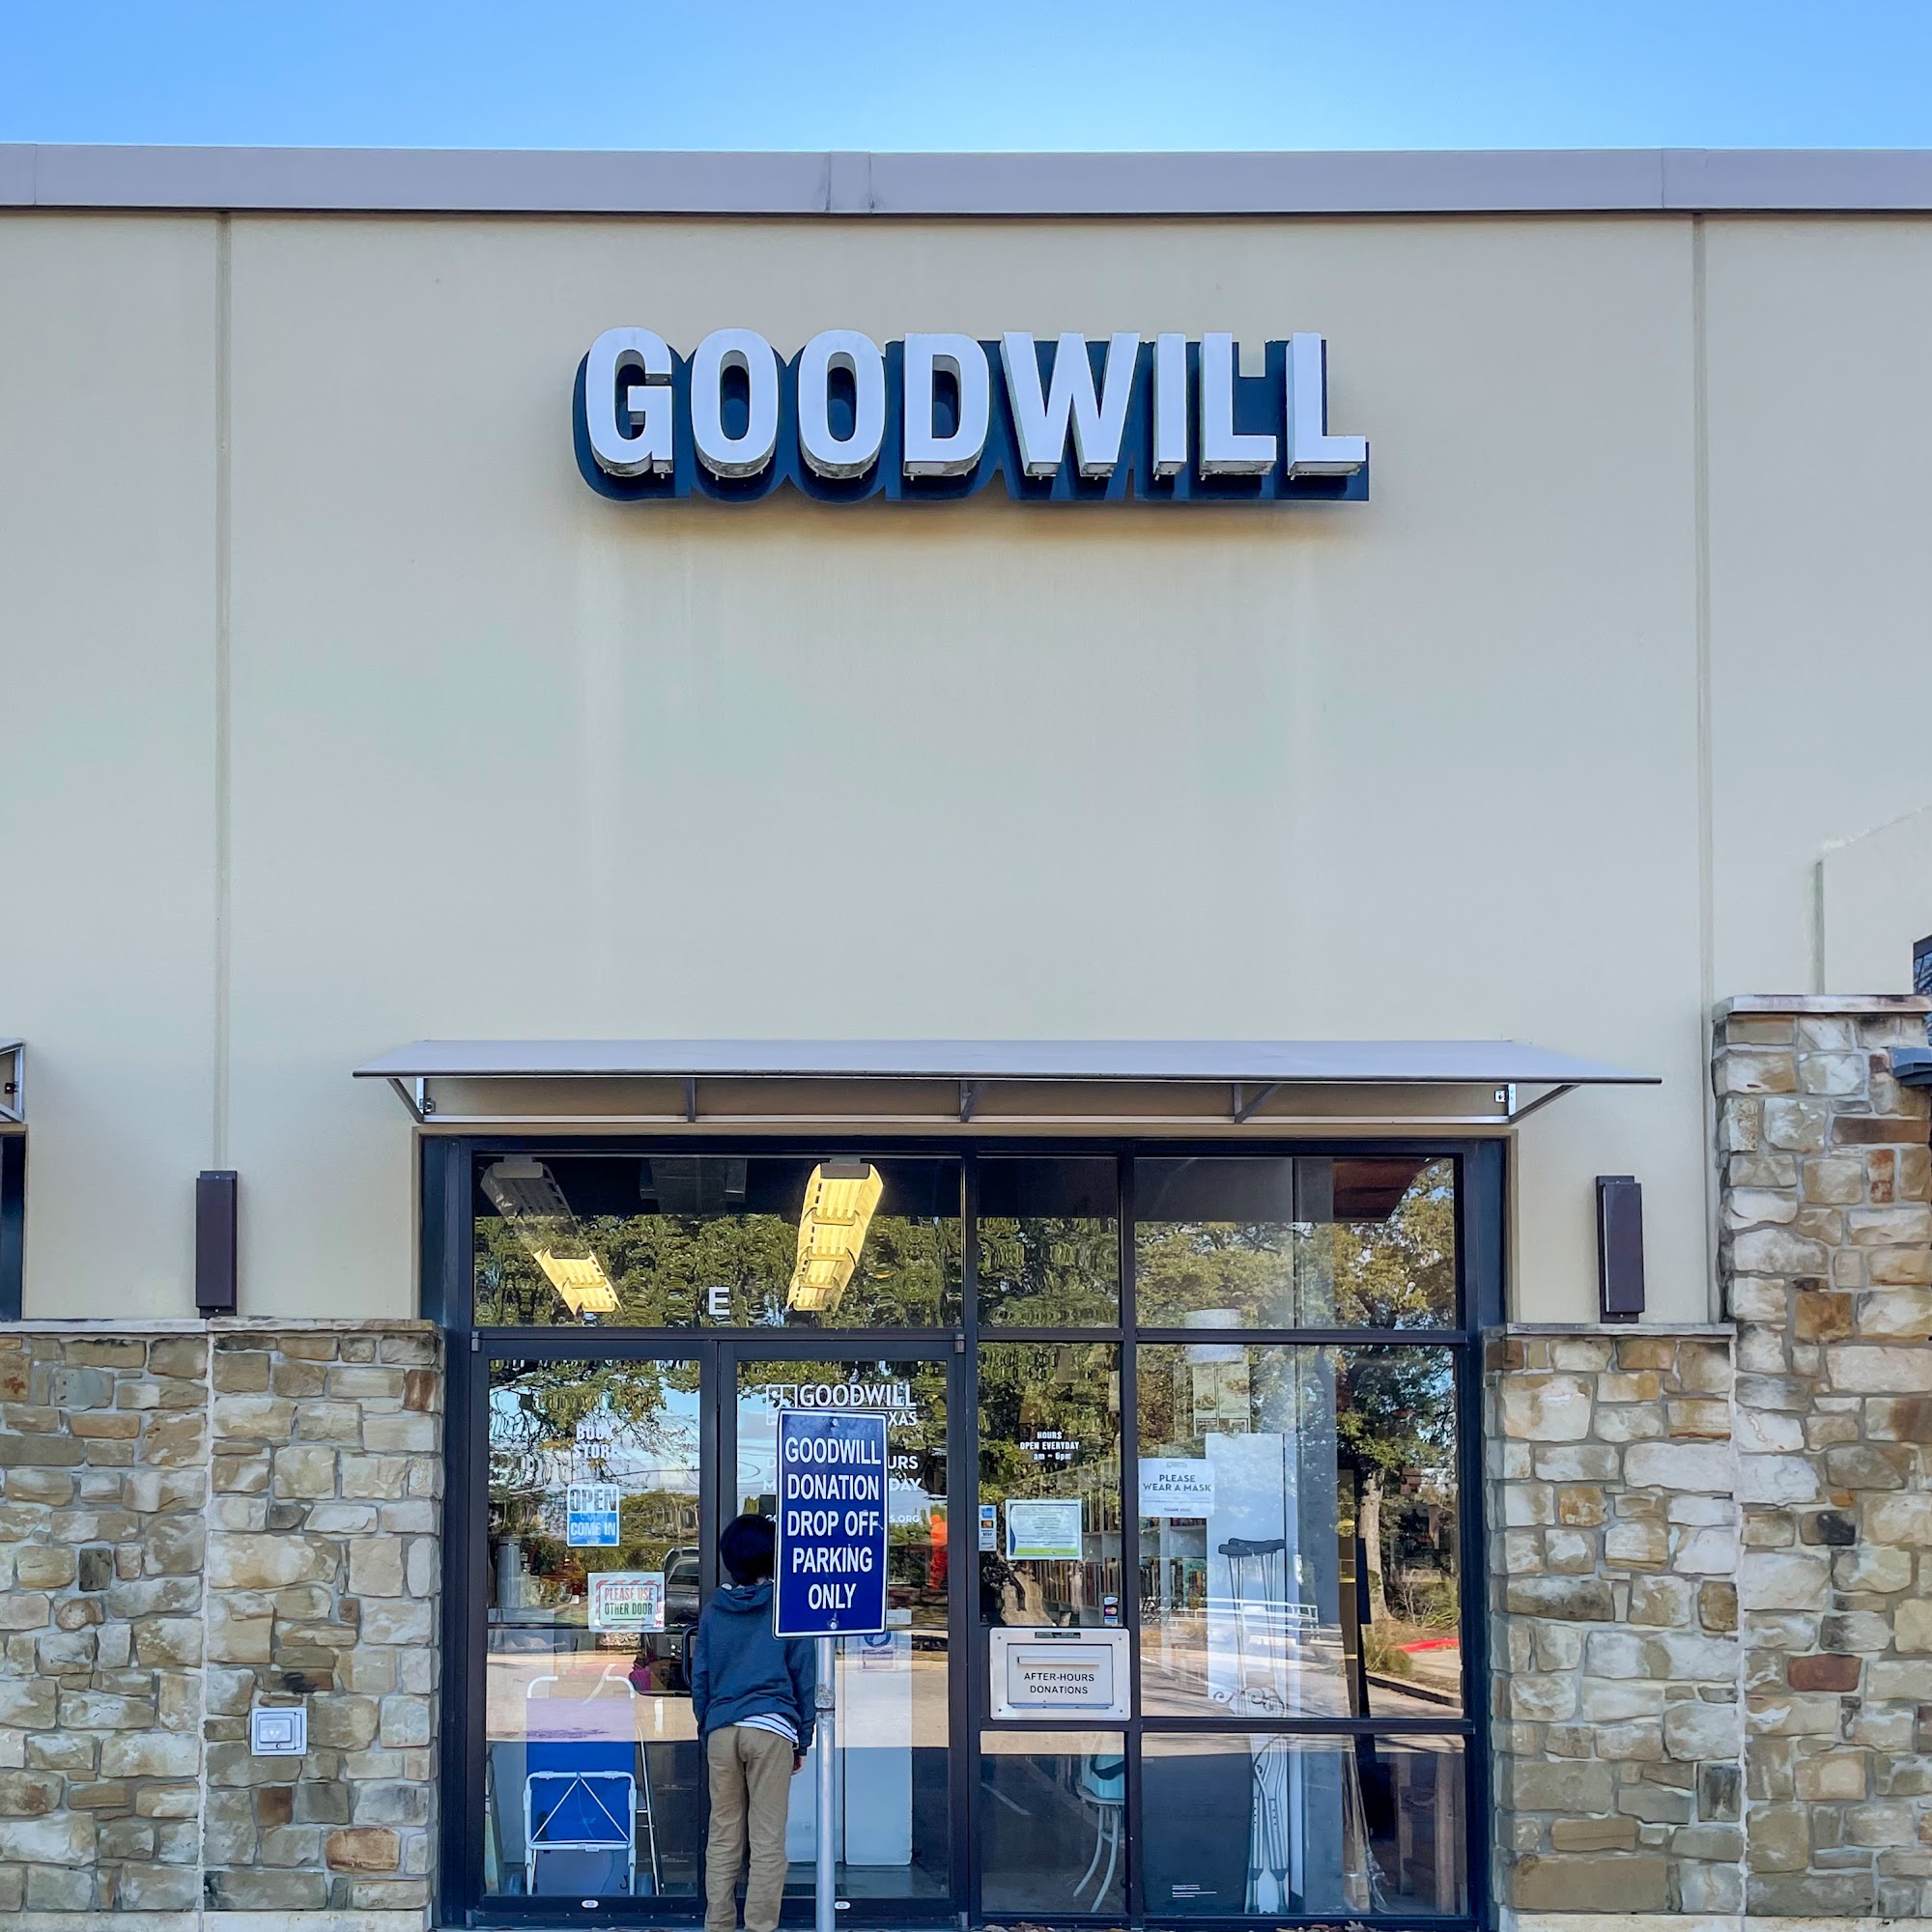 Goodwill Central Texas - Riverplace Bookstore - Attended Donation Center